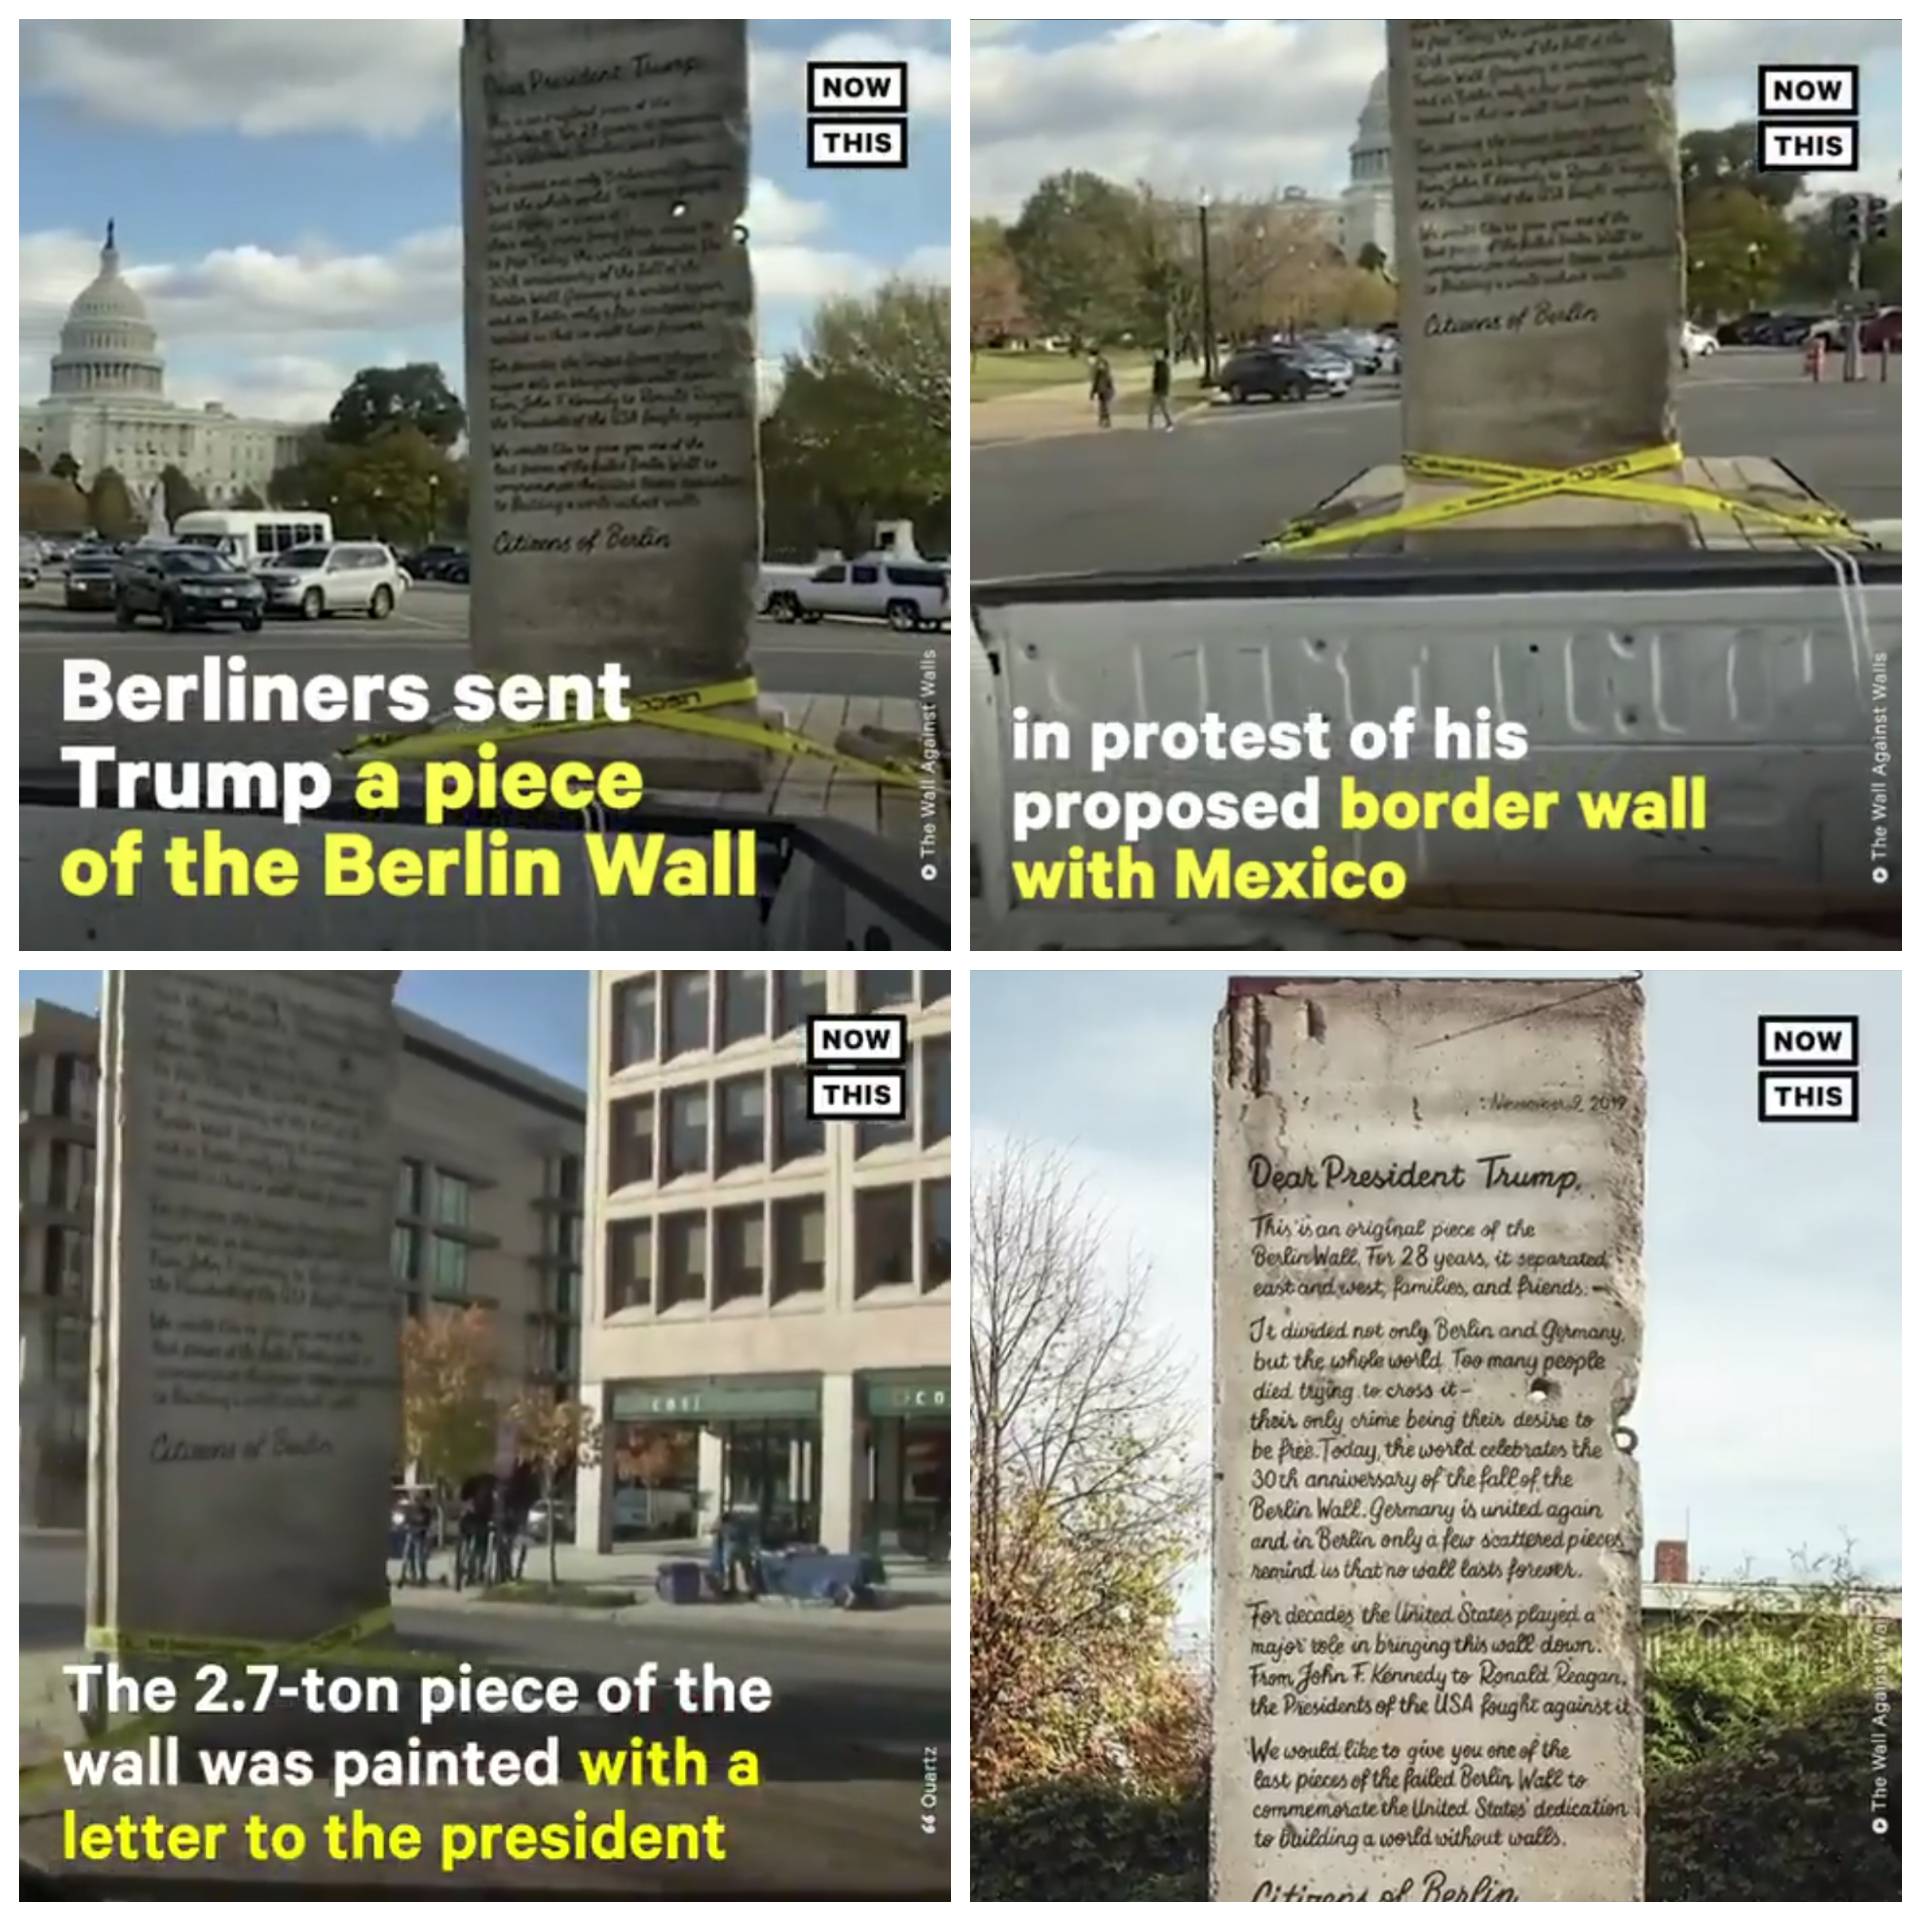 political political-memes political text: NOW THIS Berliners sent Trump a pieqe—— of the Berlin Wall THIS T e 2.7-ton piece of the wall was painted with a letter to the president NOW THIS in protest ofl his proposed border wall with Mexico NOW THIS Owouü.dea.t &ü.gGaE €eLÆaa, 28 and Ct. du»ded and but the did t.gug te c.hoS3 . ohim.e being• thea desiÅ t& be hei.TMag, th ct&tatz•. the 30th antioewahy and a tae . p